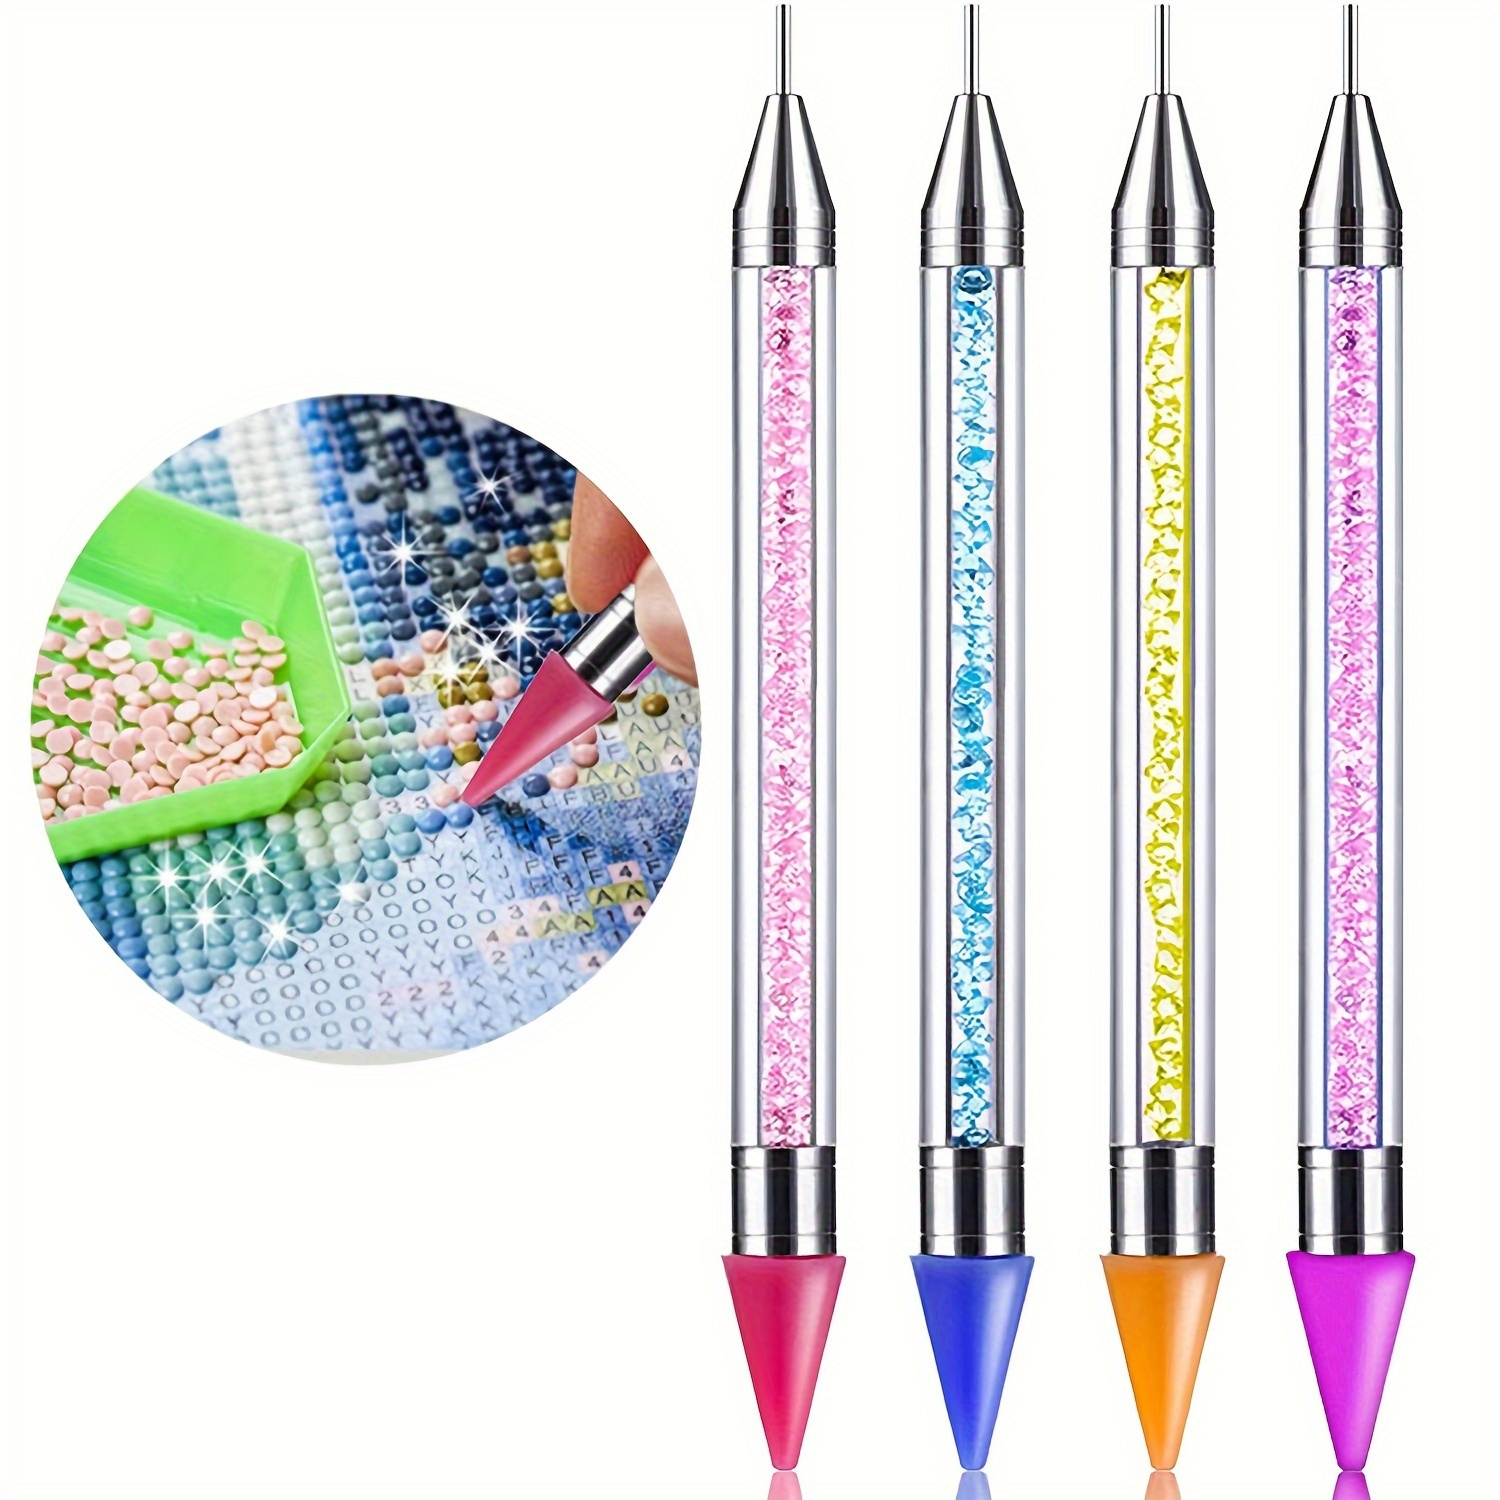 

4pcs Wax-free Diamond Painting Tools, Self-adhesive Pen, Double Tip Clay-free Professional Design, With Diamond Accessories, Suitable For 5d Diy Painting Crafts Cross-stitch